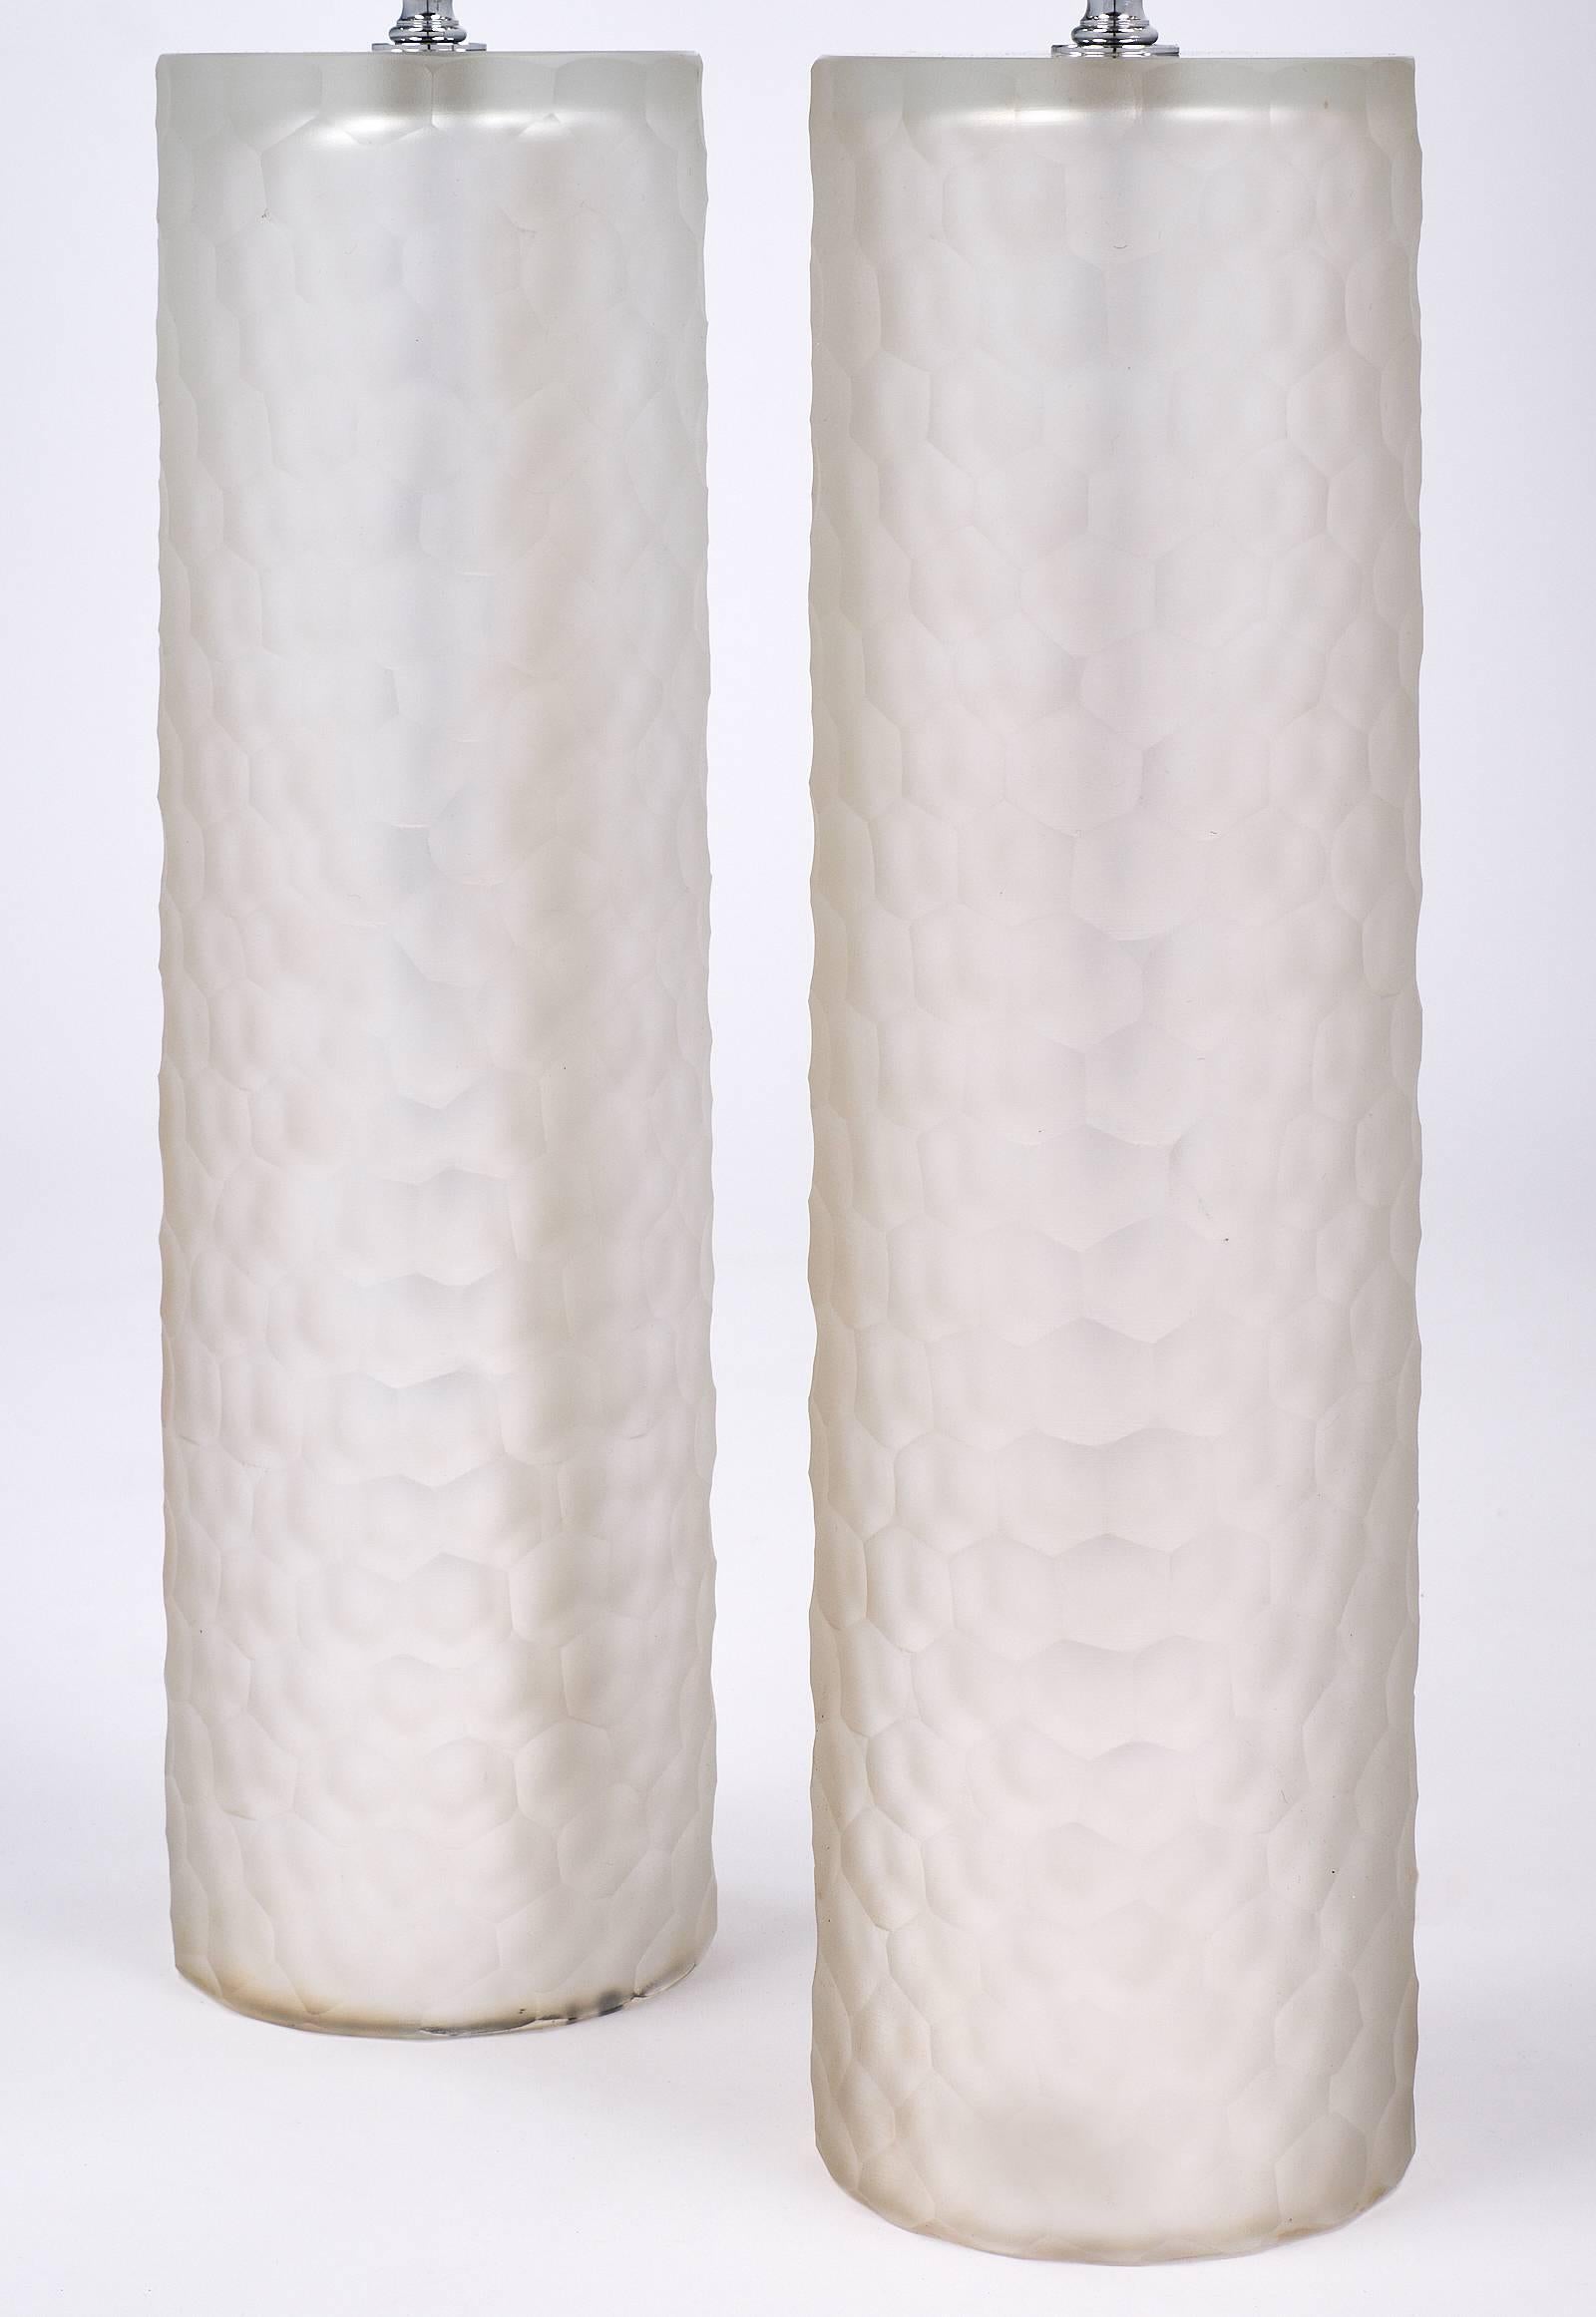 Pair of Mirrored Murano Glass “Battute” Lamps In Excellent Condition For Sale In Austin, TX